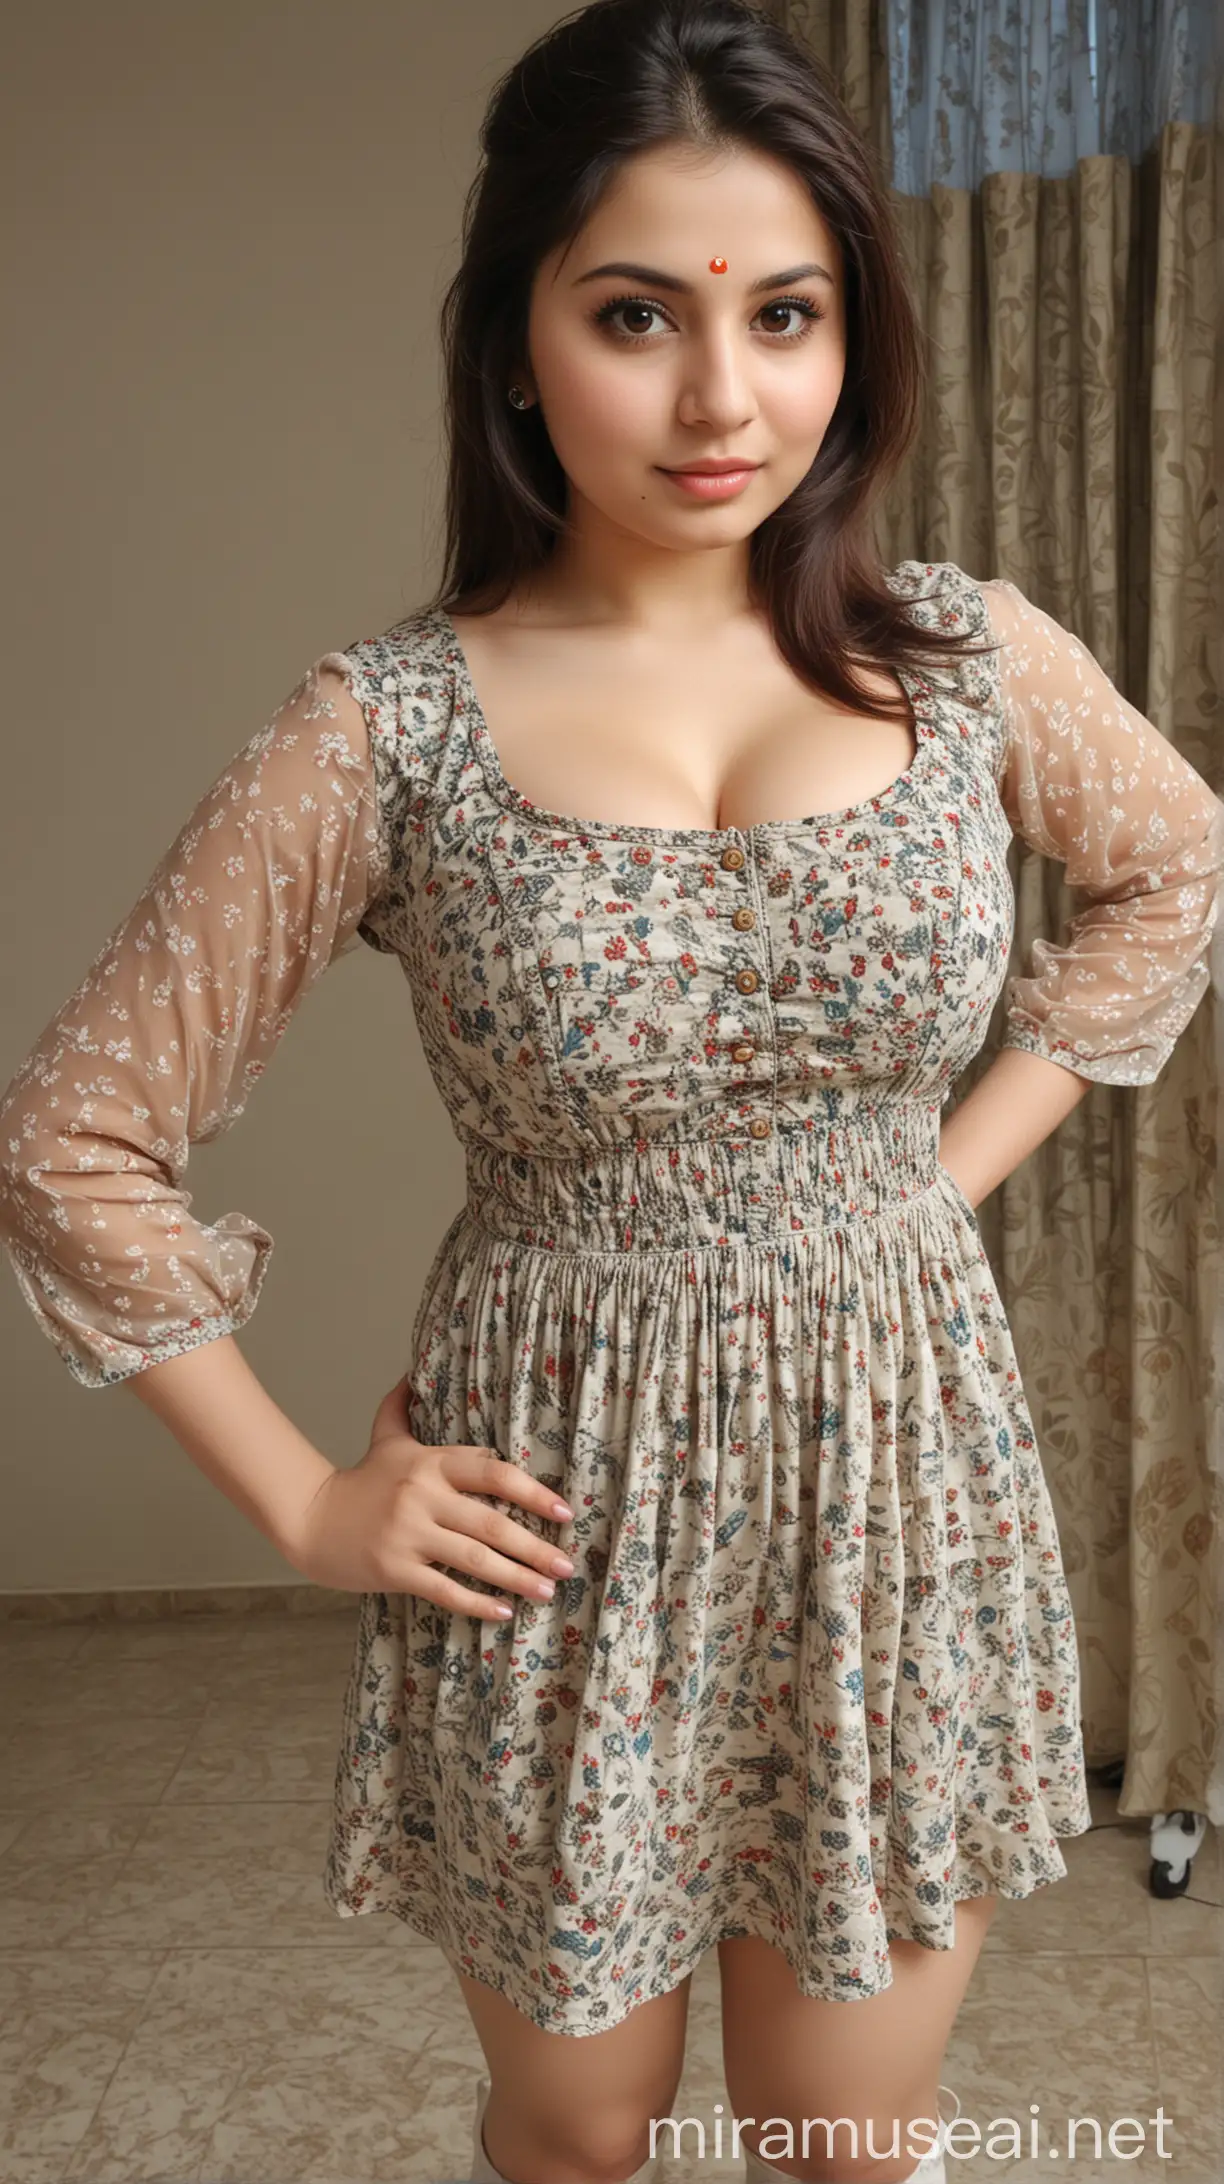 Pakistani Girl in Small Dress Facing the Camera with Extreme Features